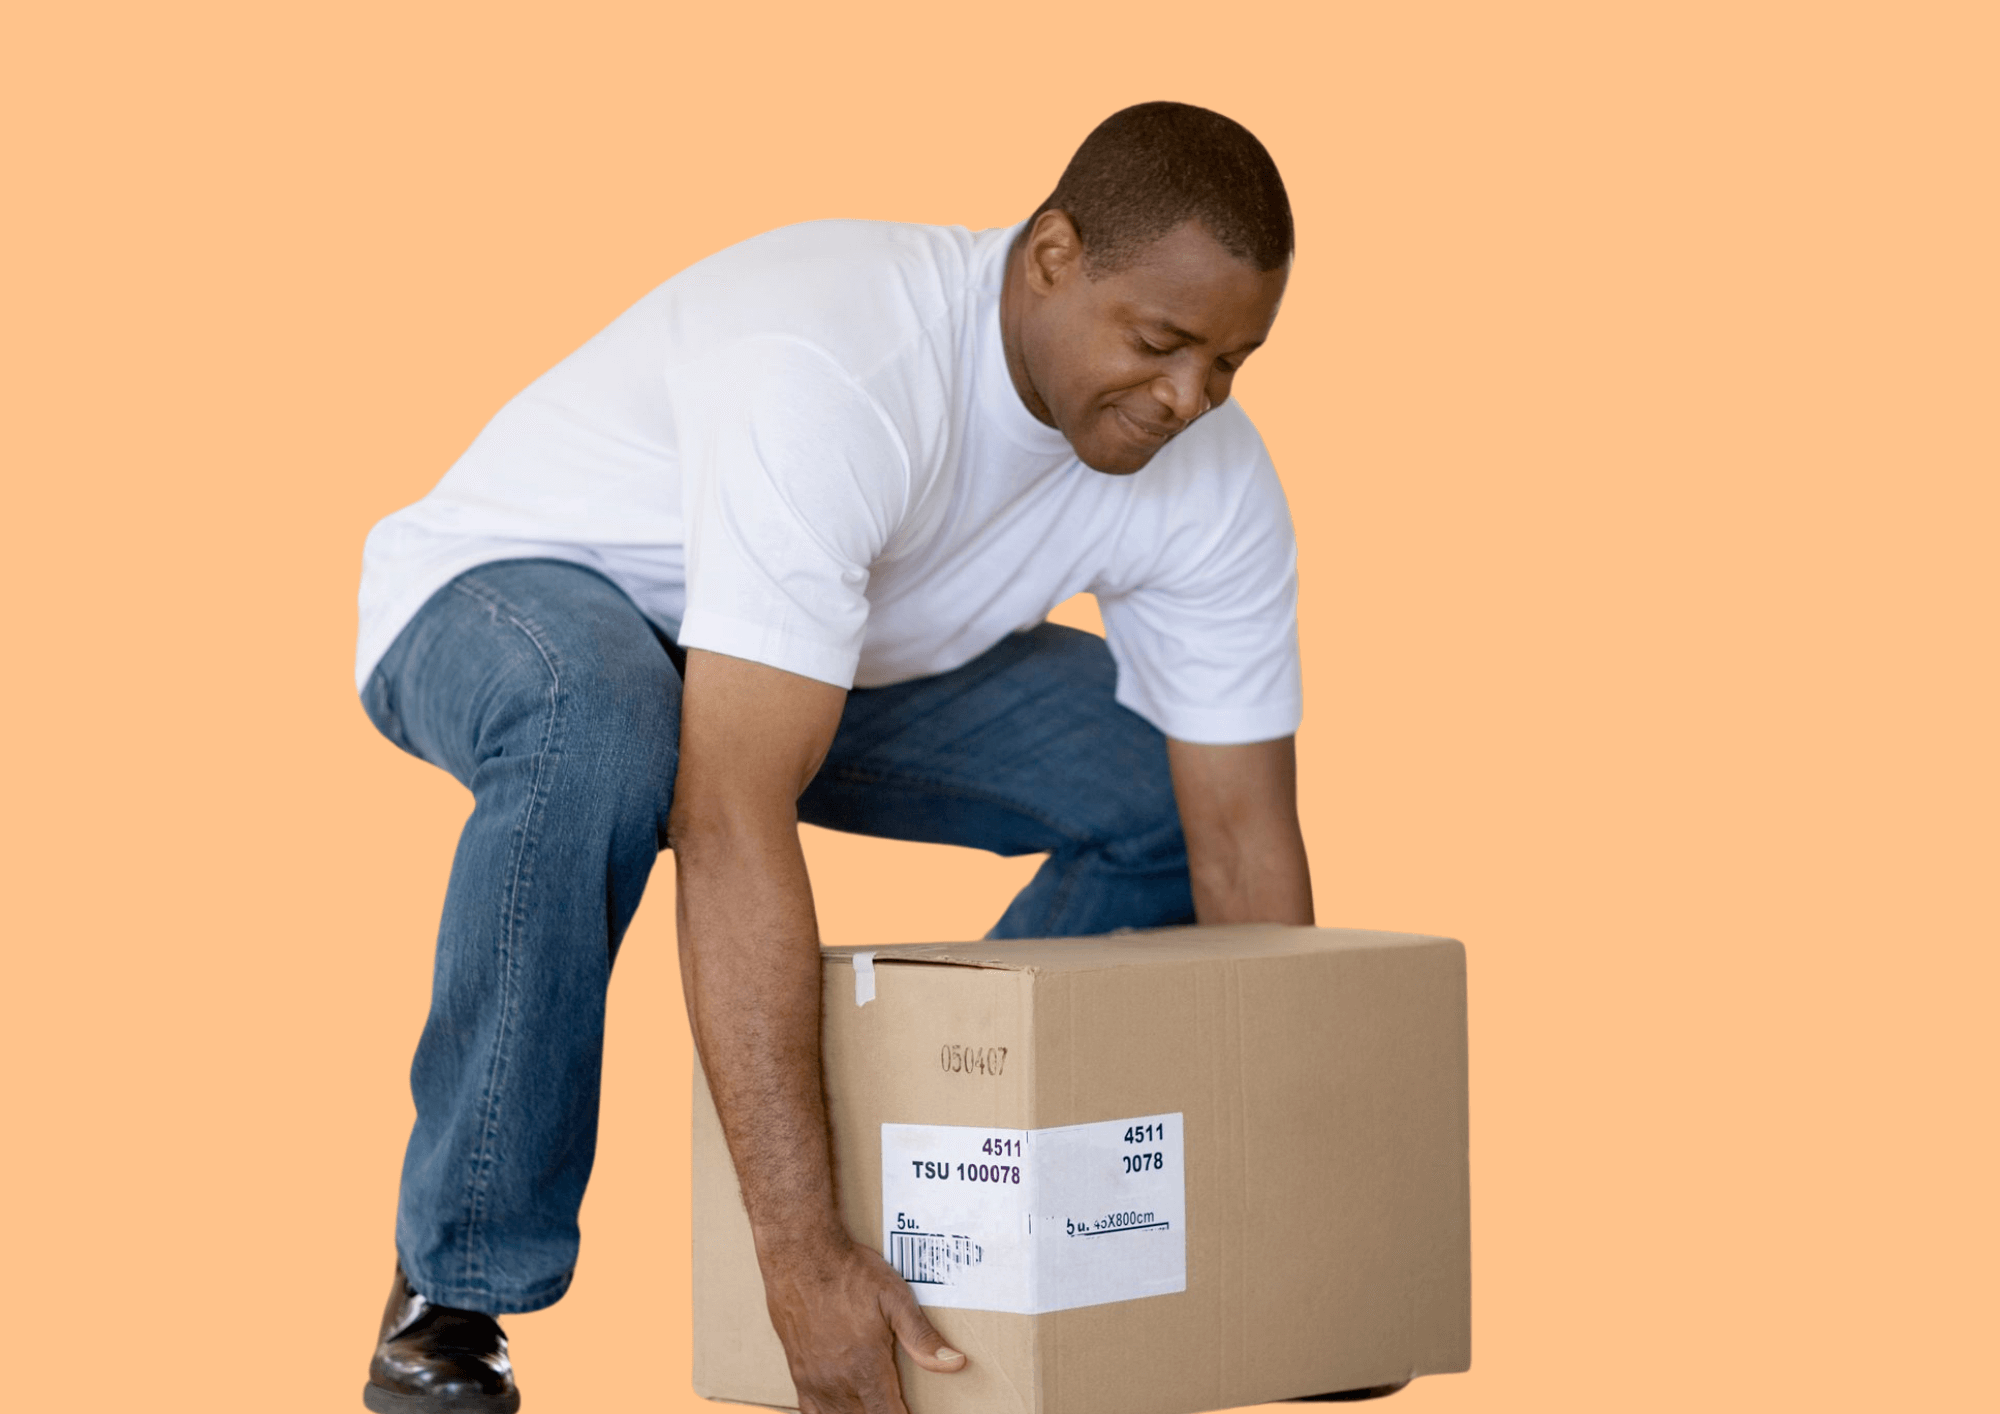 Man lifting heavy package which leads to intense lower back pain.